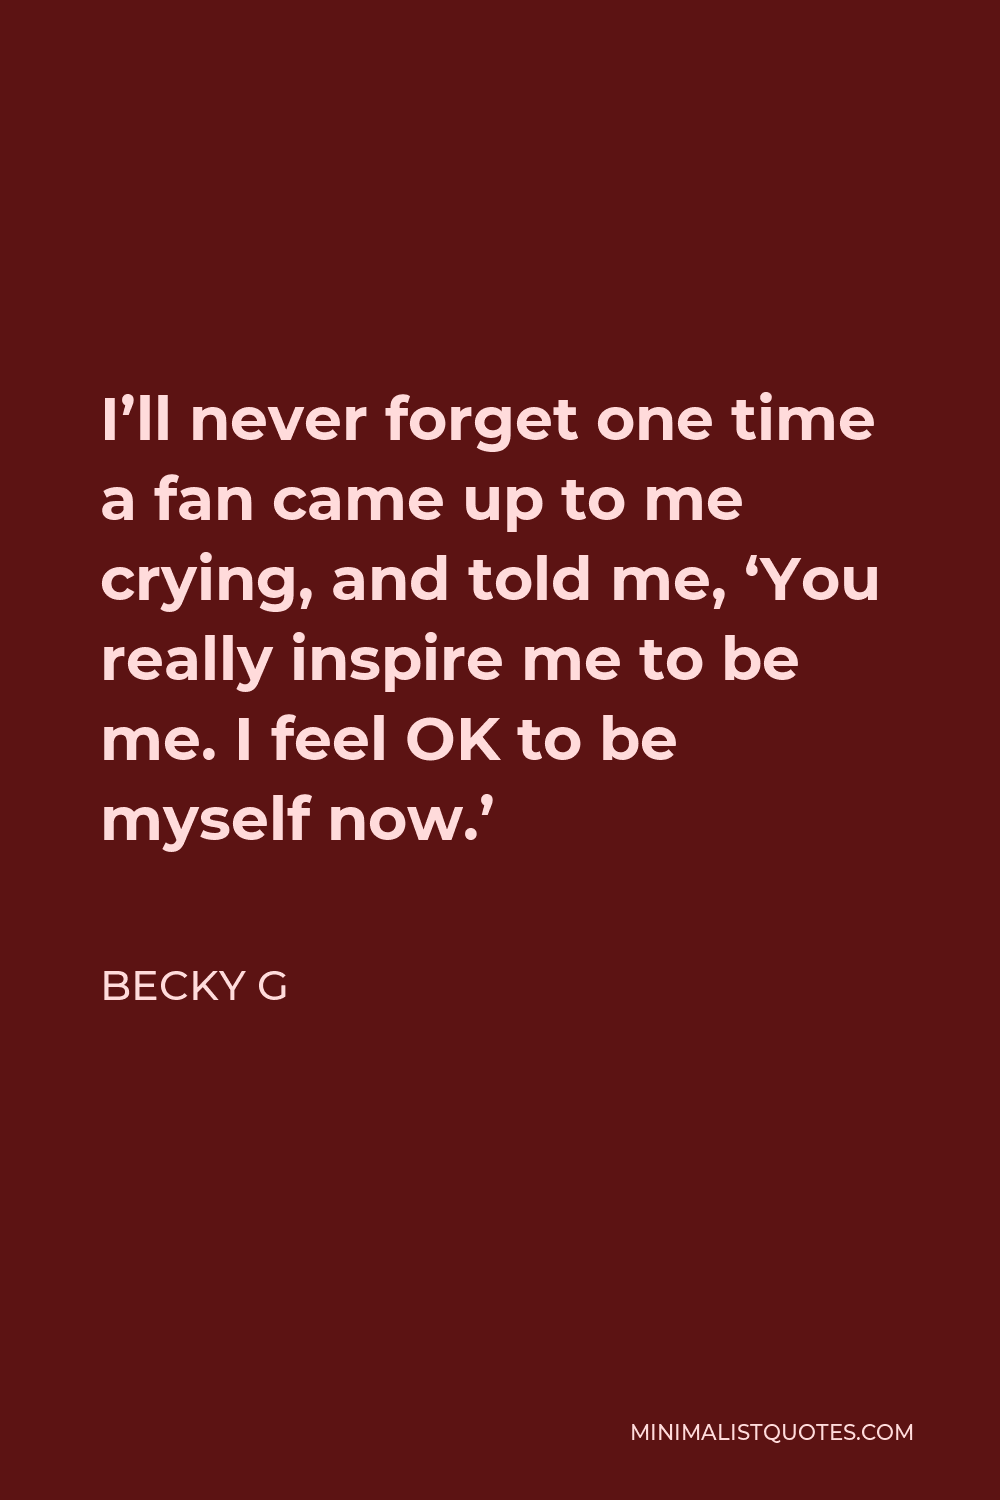 Becky G Quote - I’ll never forget one time a fan came up to me crying, and told me, ‘You really inspire me to be me. I feel OK to be myself now.’